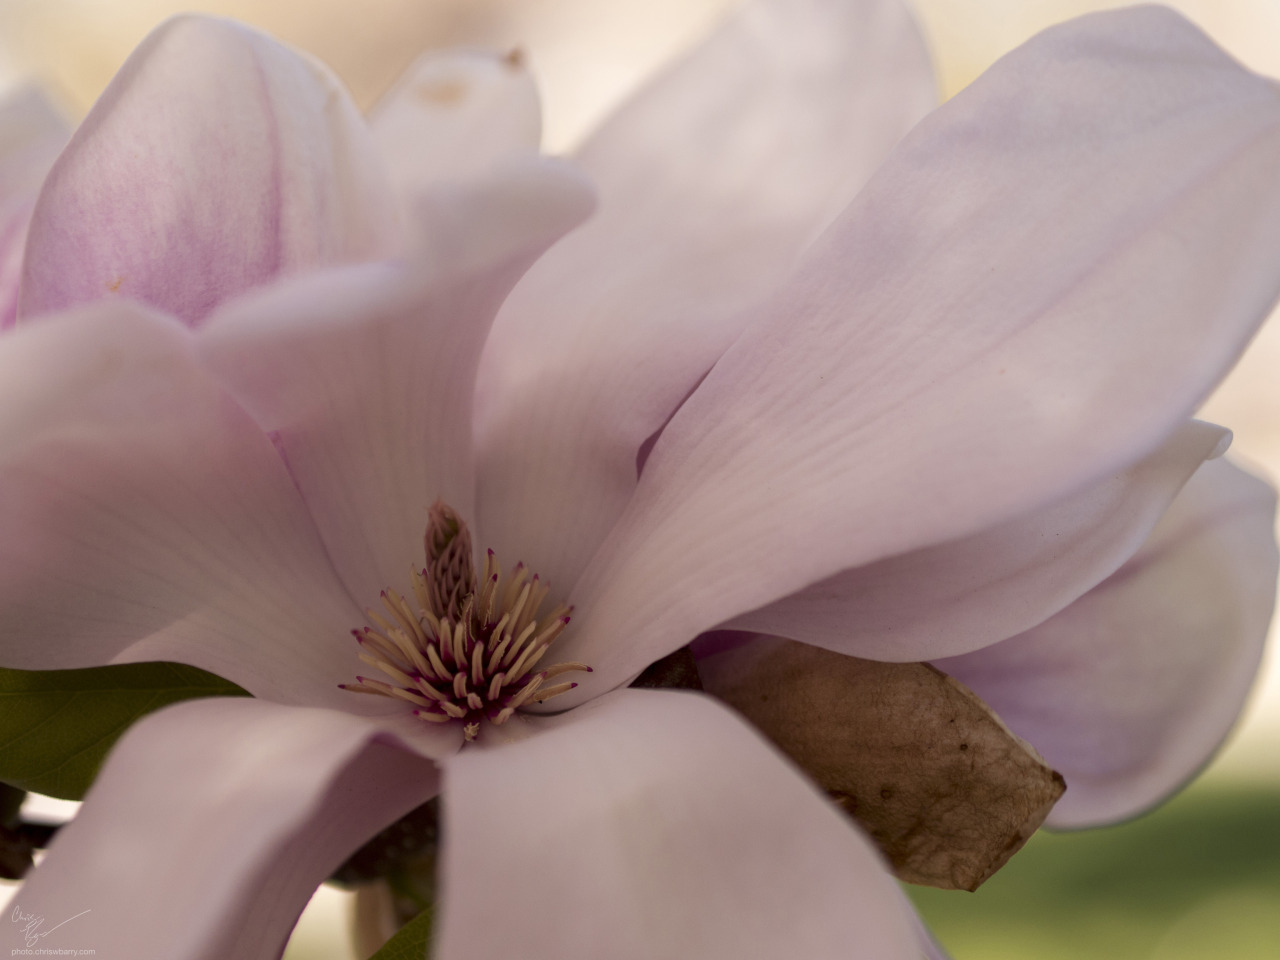 And a magnolia flower, I think